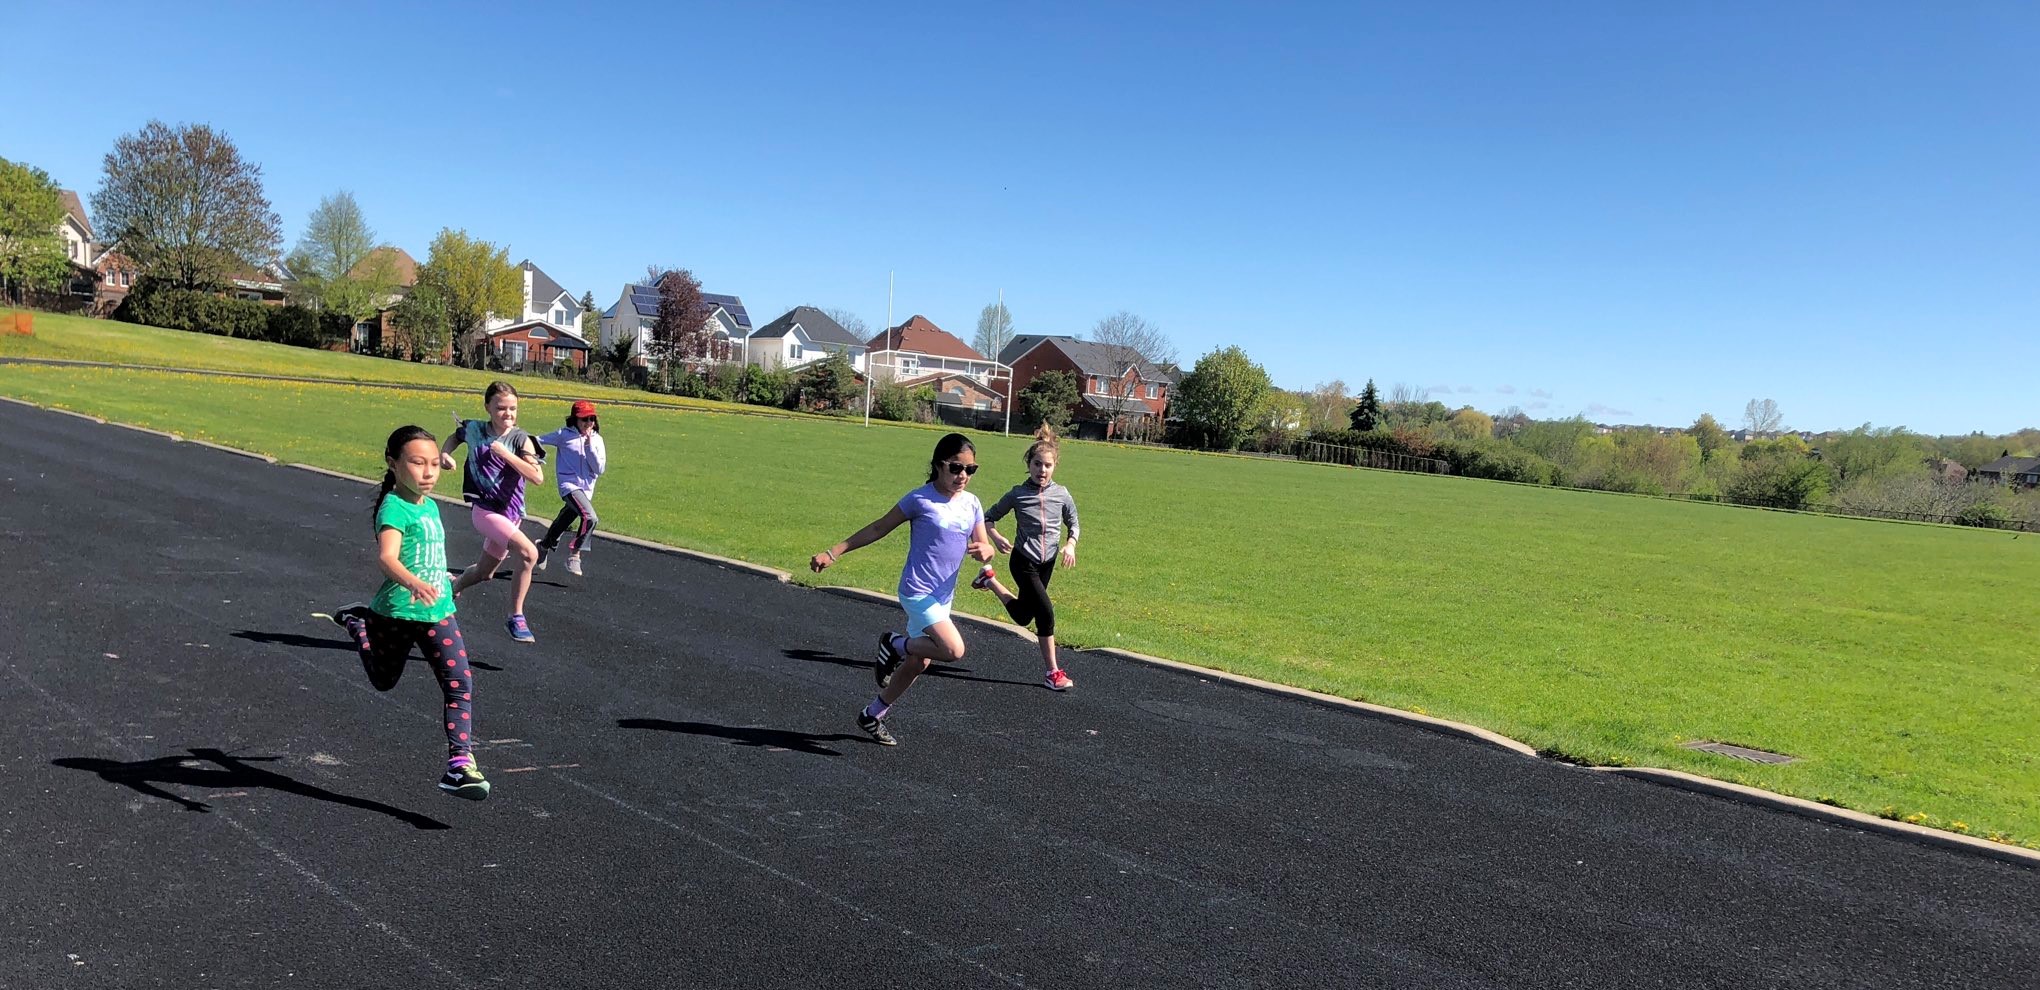 Five female students running on an outdoor track